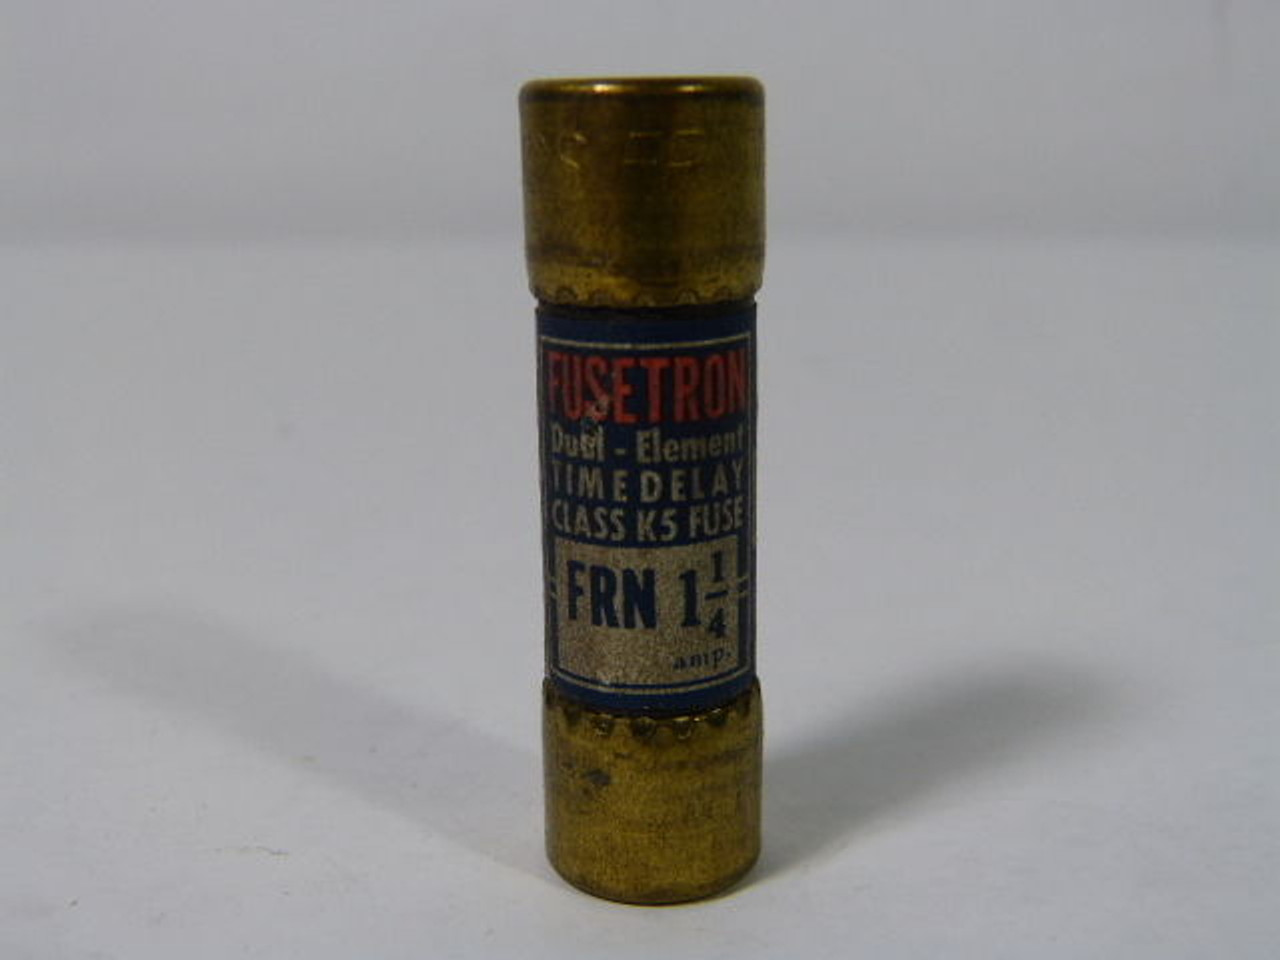 Fusetron FRN-1-1/4 Dual Element Fuse 1-1/4A 250V USED